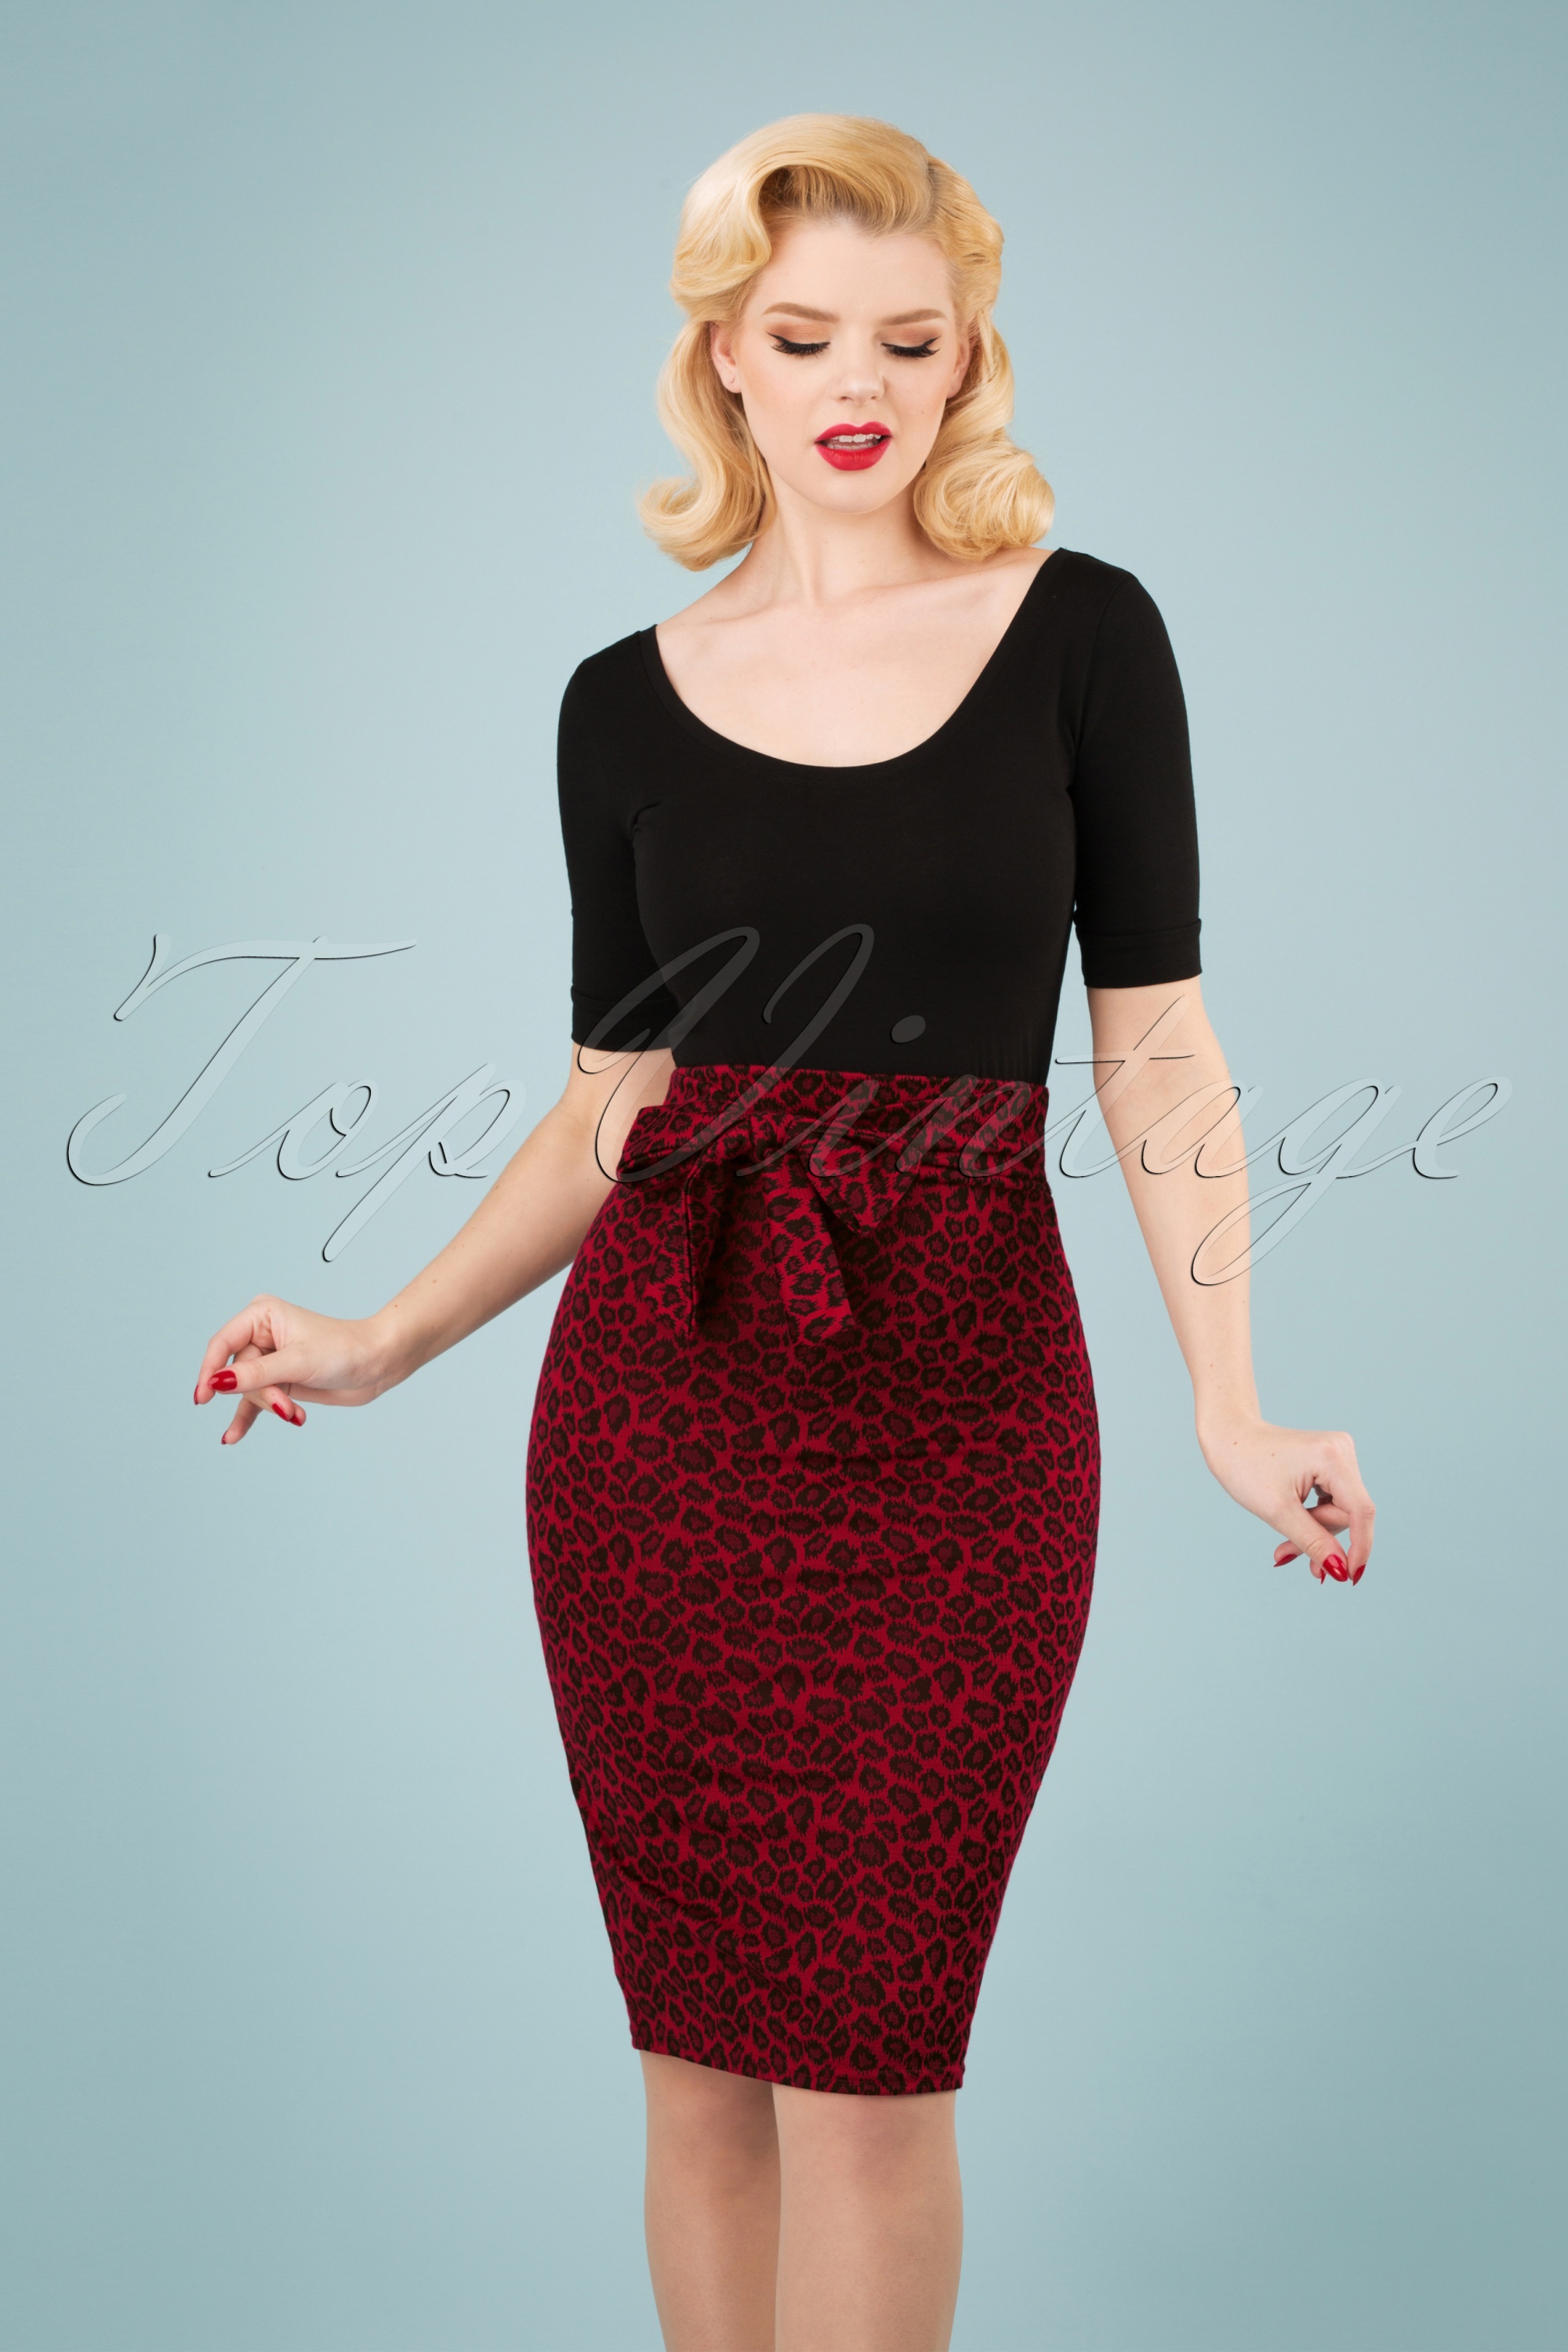 Vintage Chic for Topvintage - Shana Luipaardpencilrok in rood